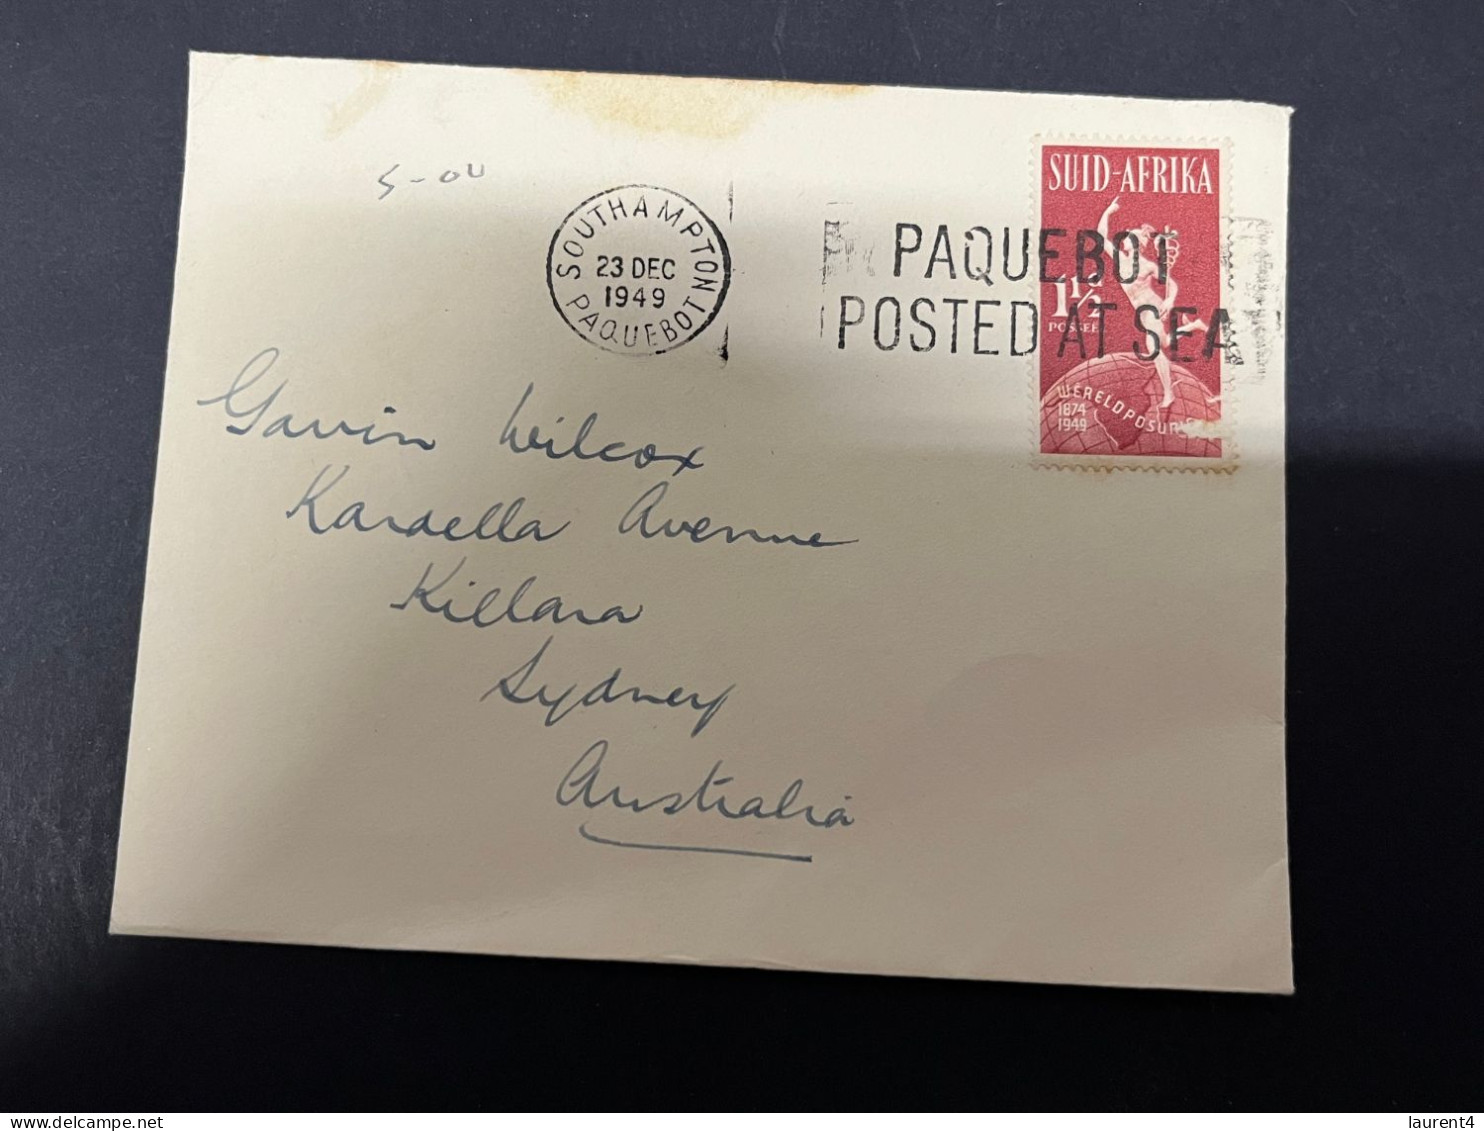 7-12-2023 (3 W 34) Paquebot Mail Posted From South Africa To Australia (1949) As Seen On Scan (Union Castle Line) - Andere(Zee)